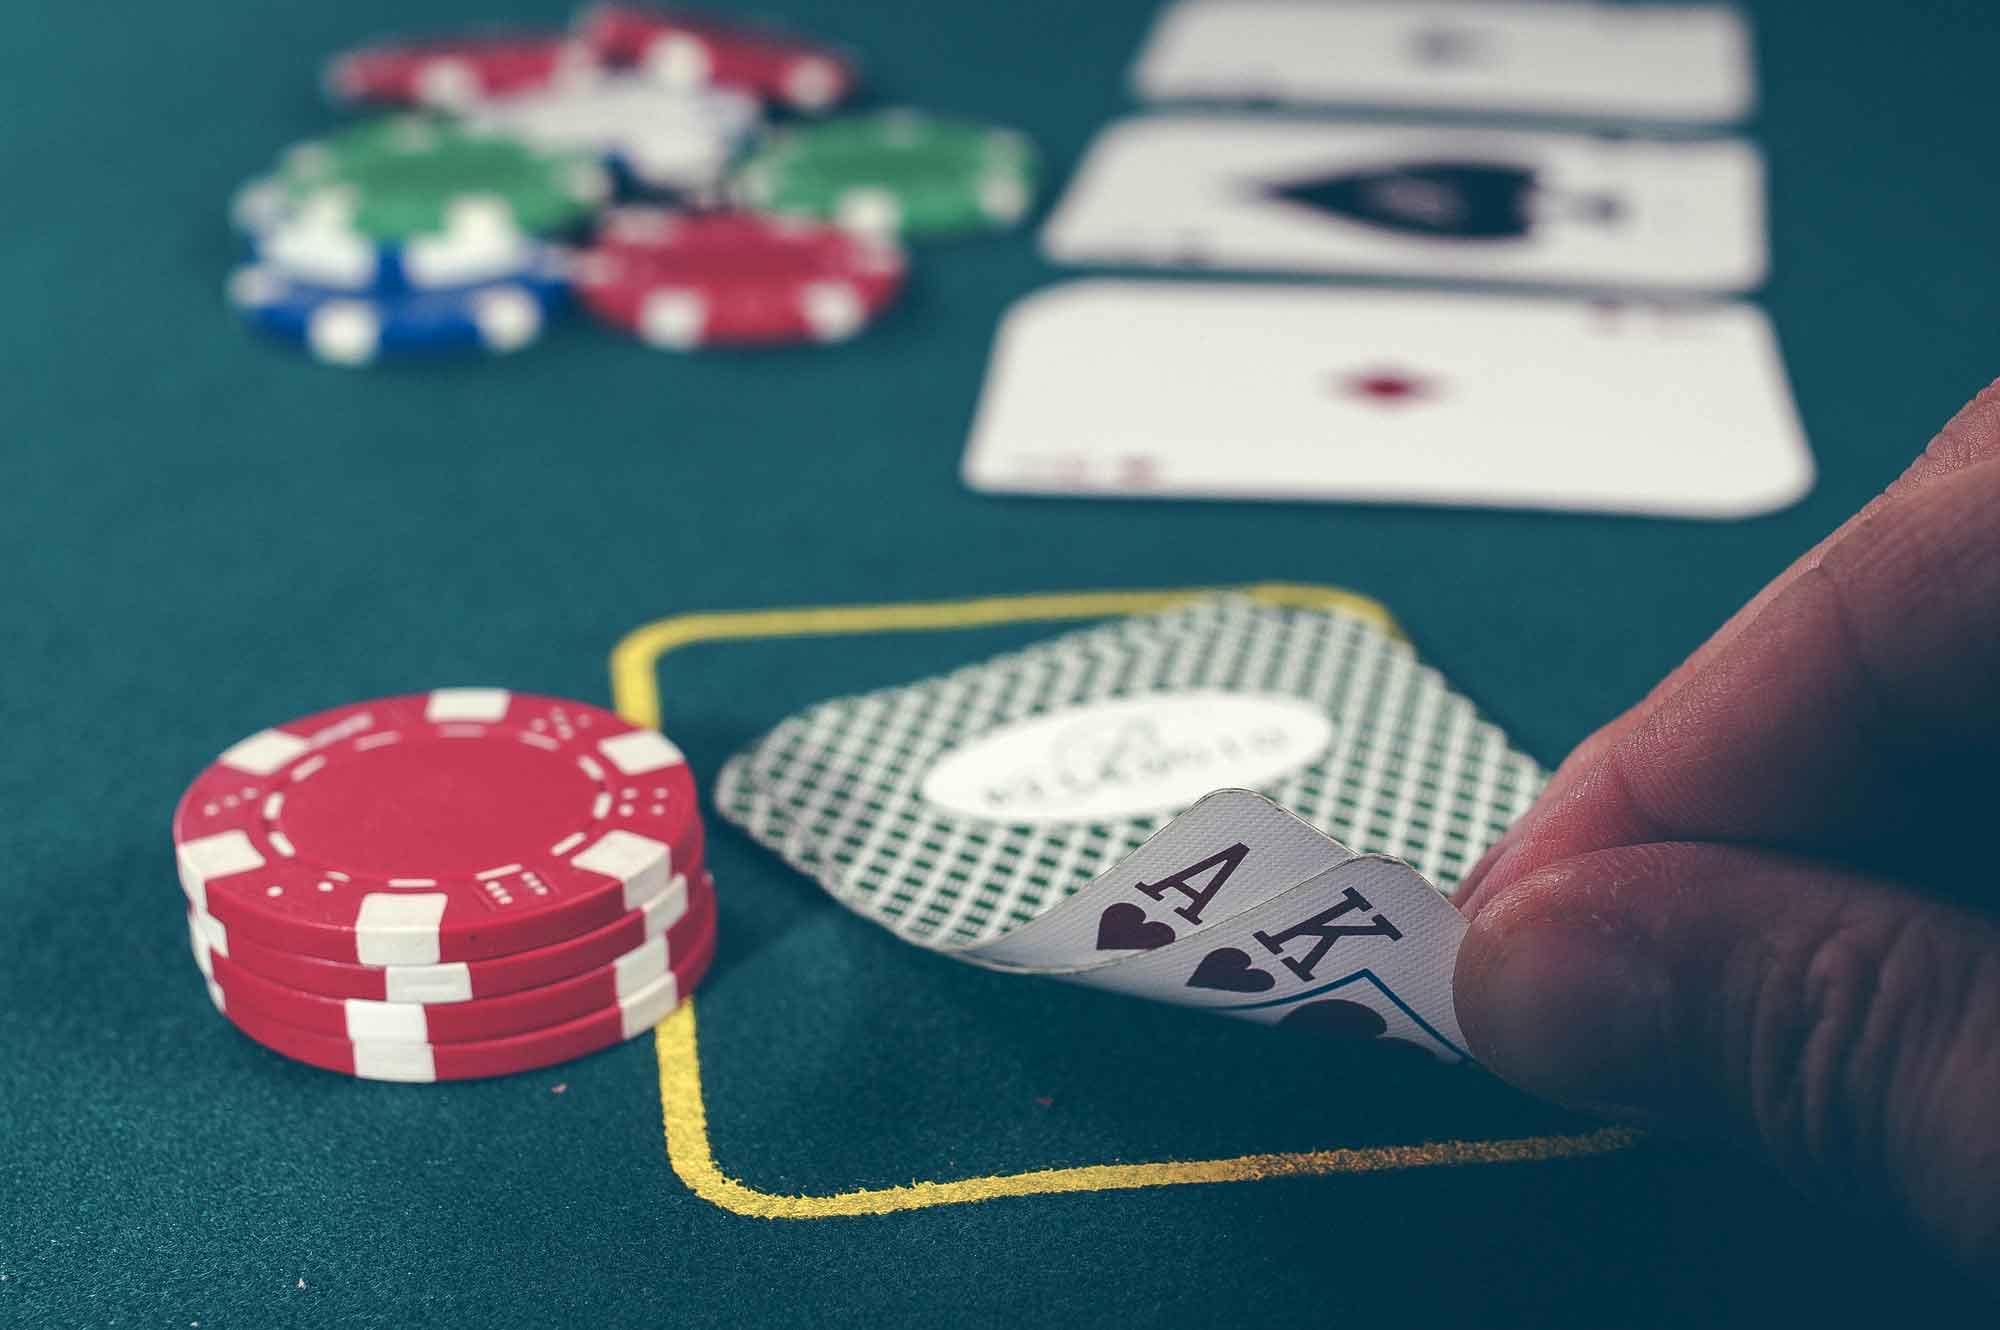 Can You Really Successfully Supplement Your Income Playing Online Casino Games?